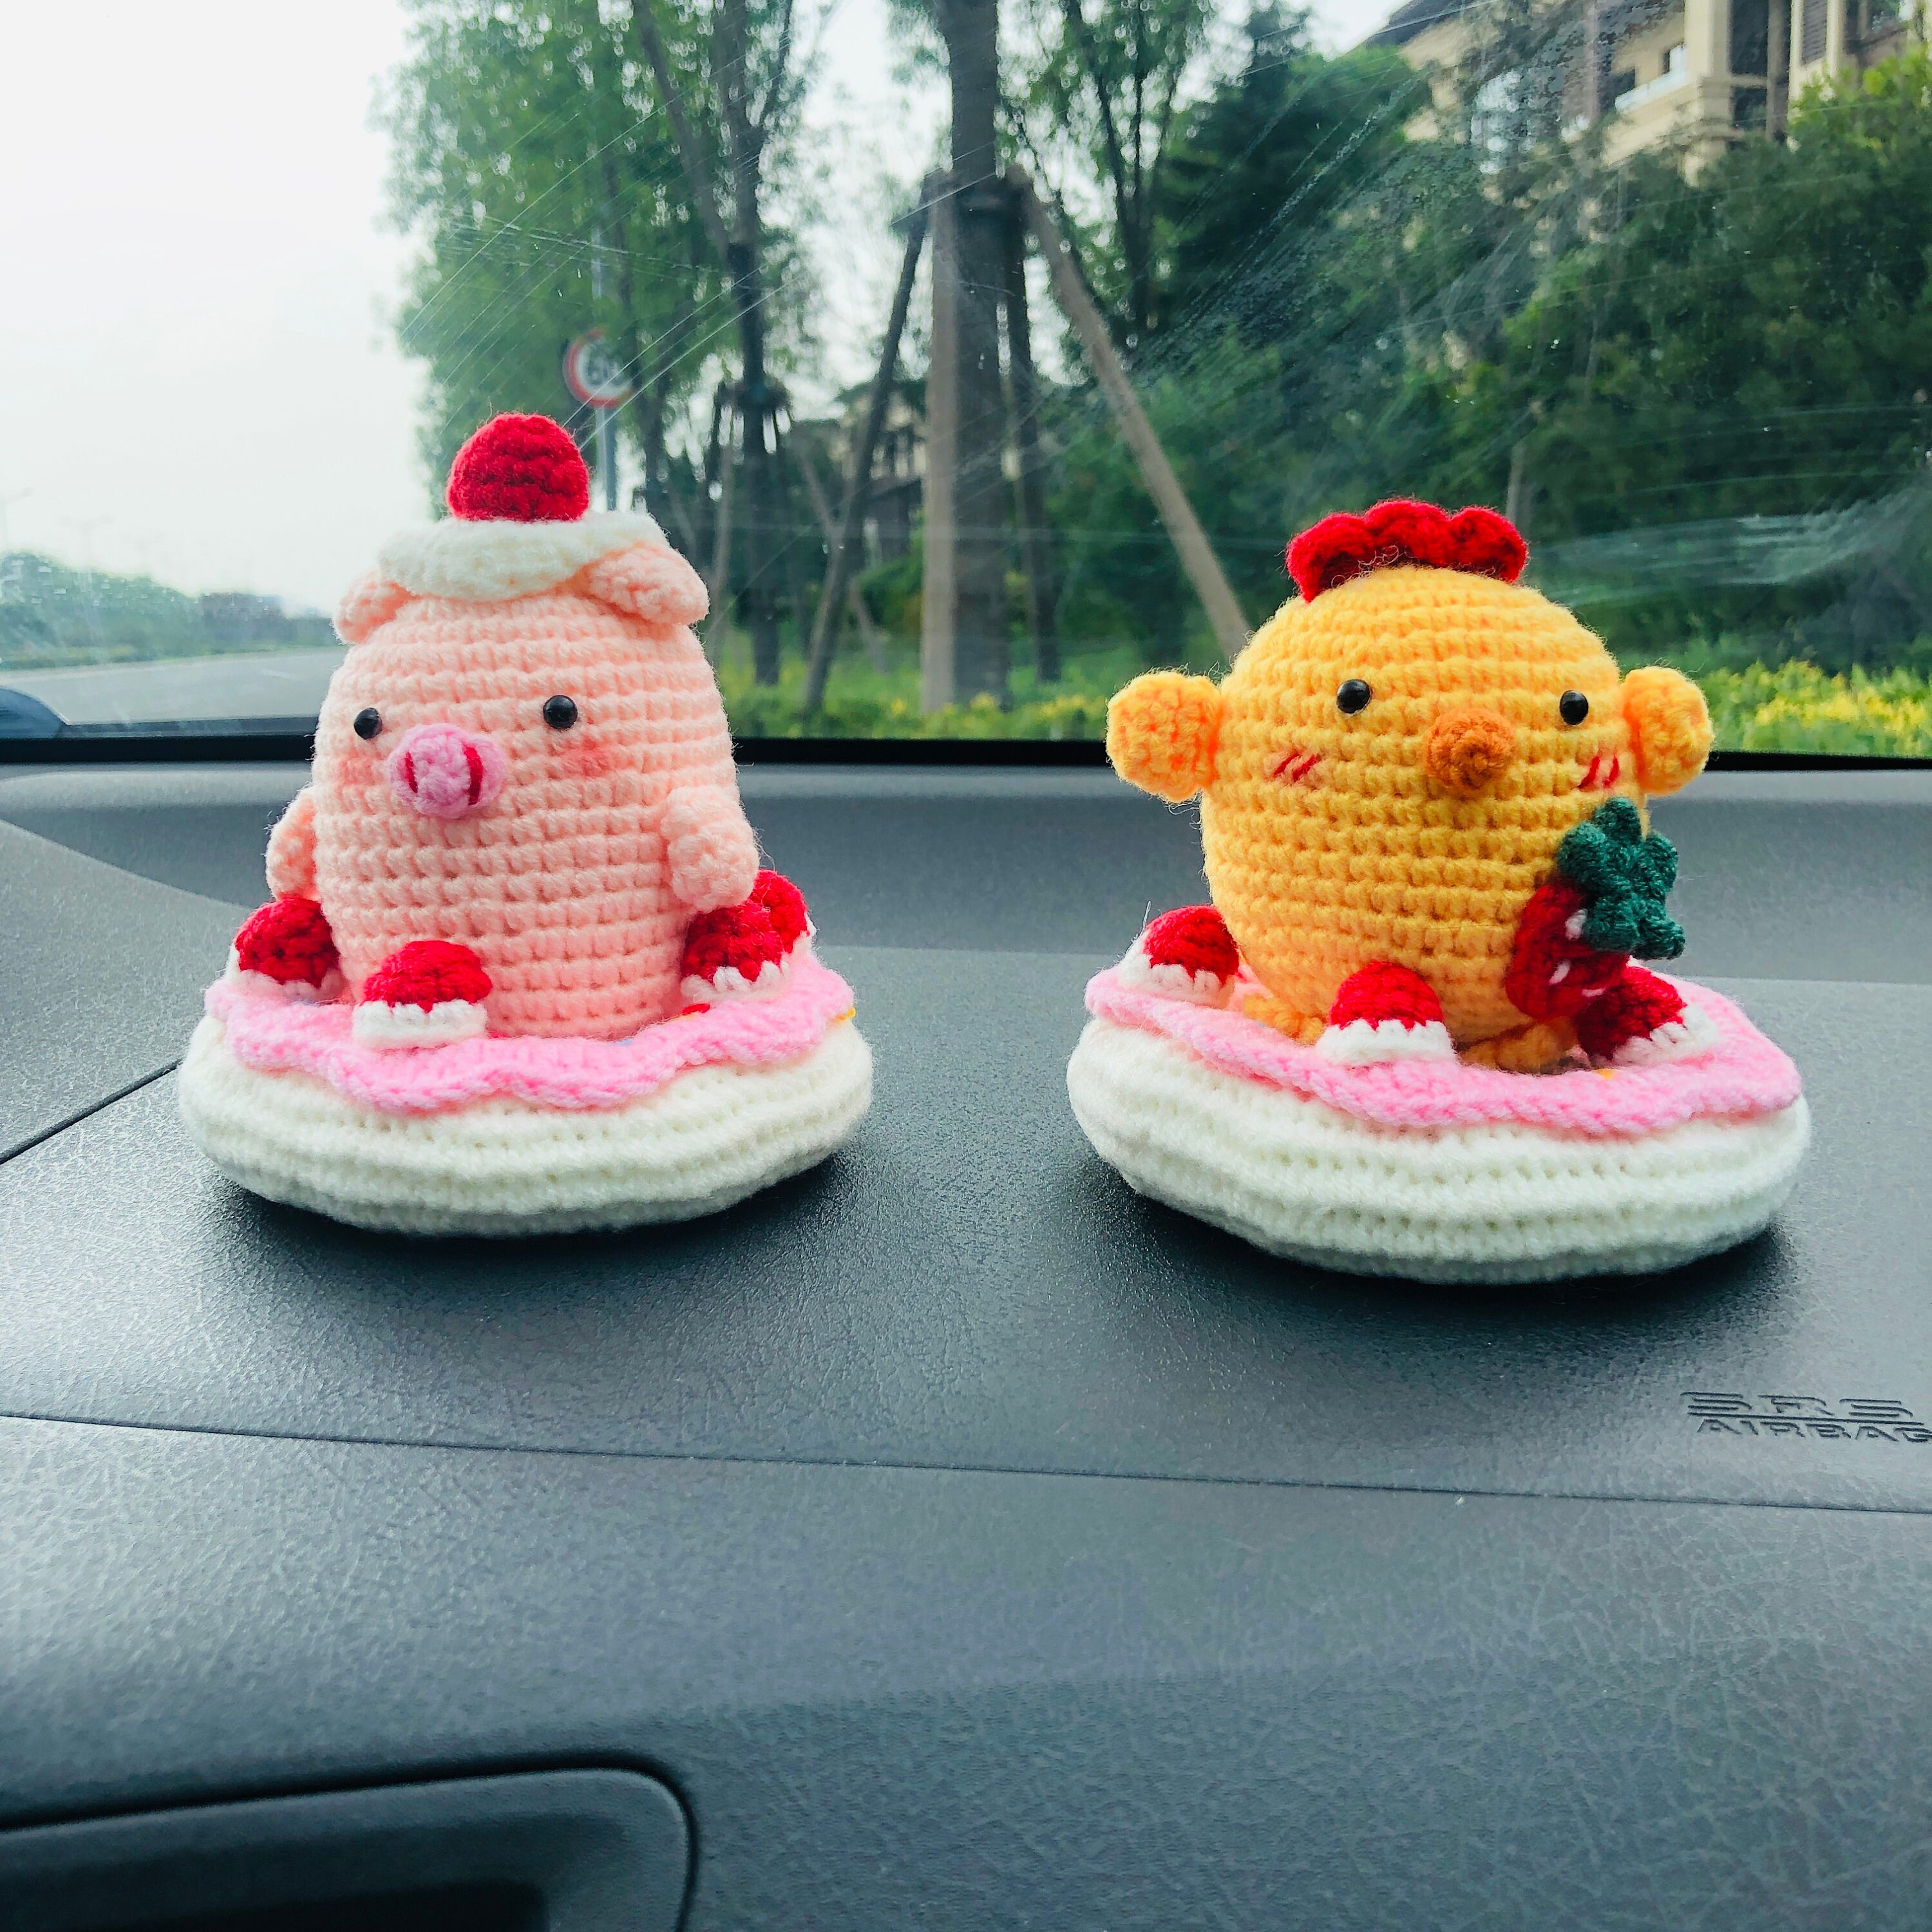 Galepromot 5Pcs Mini Chicken Car Interior Decoration,Little Chicken Chick  Ornament,Auto Rearview Mirror Dashboard Ornaments for Woman Man Gift Car